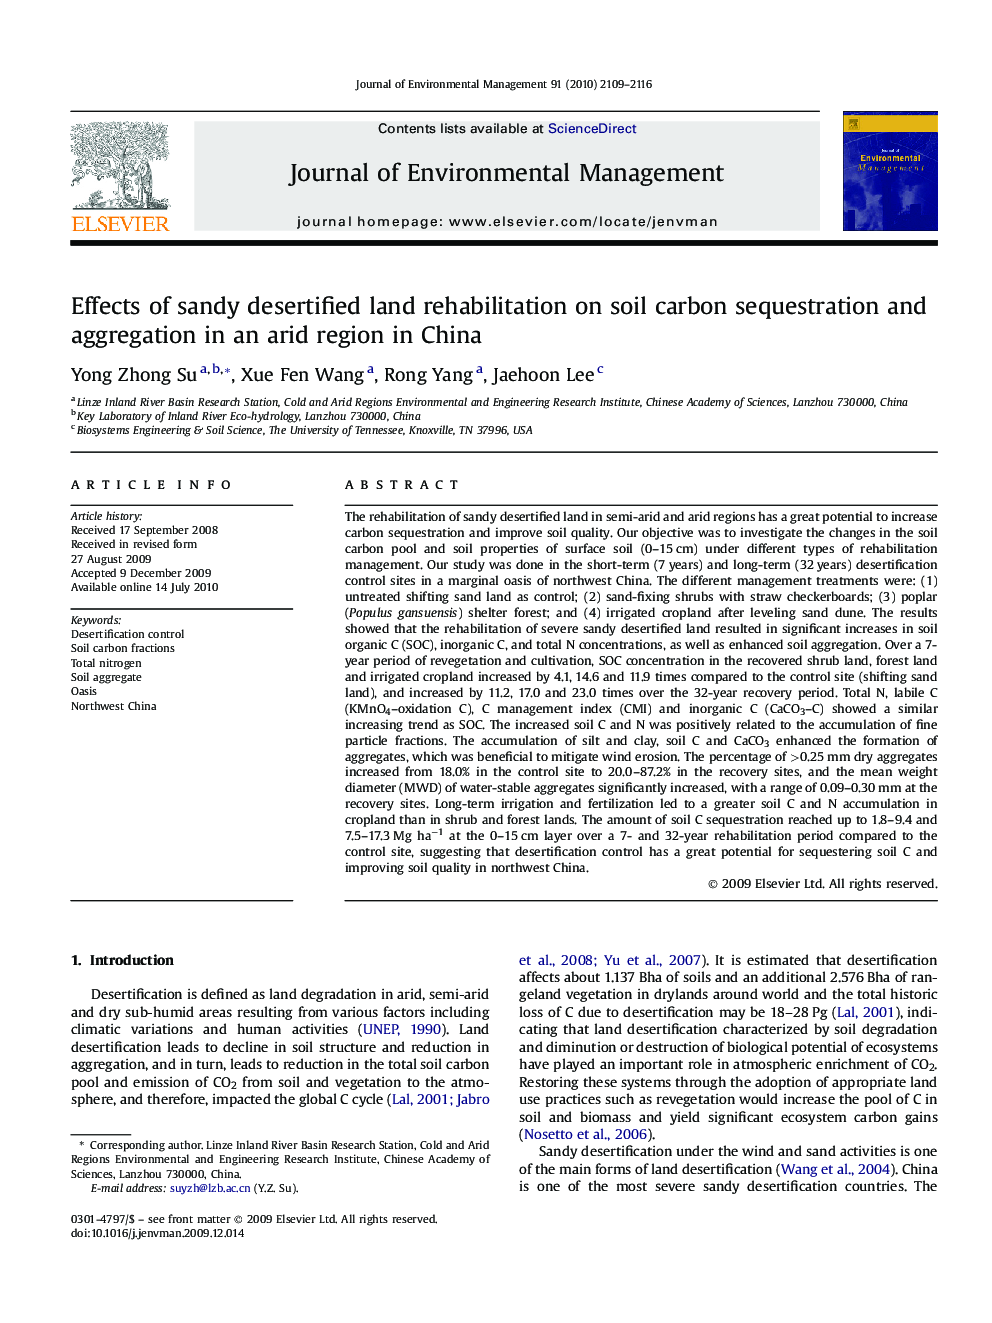 Effects of sandy desertified land rehabilitation on soil carbon sequestration and aggregation in an arid region in China